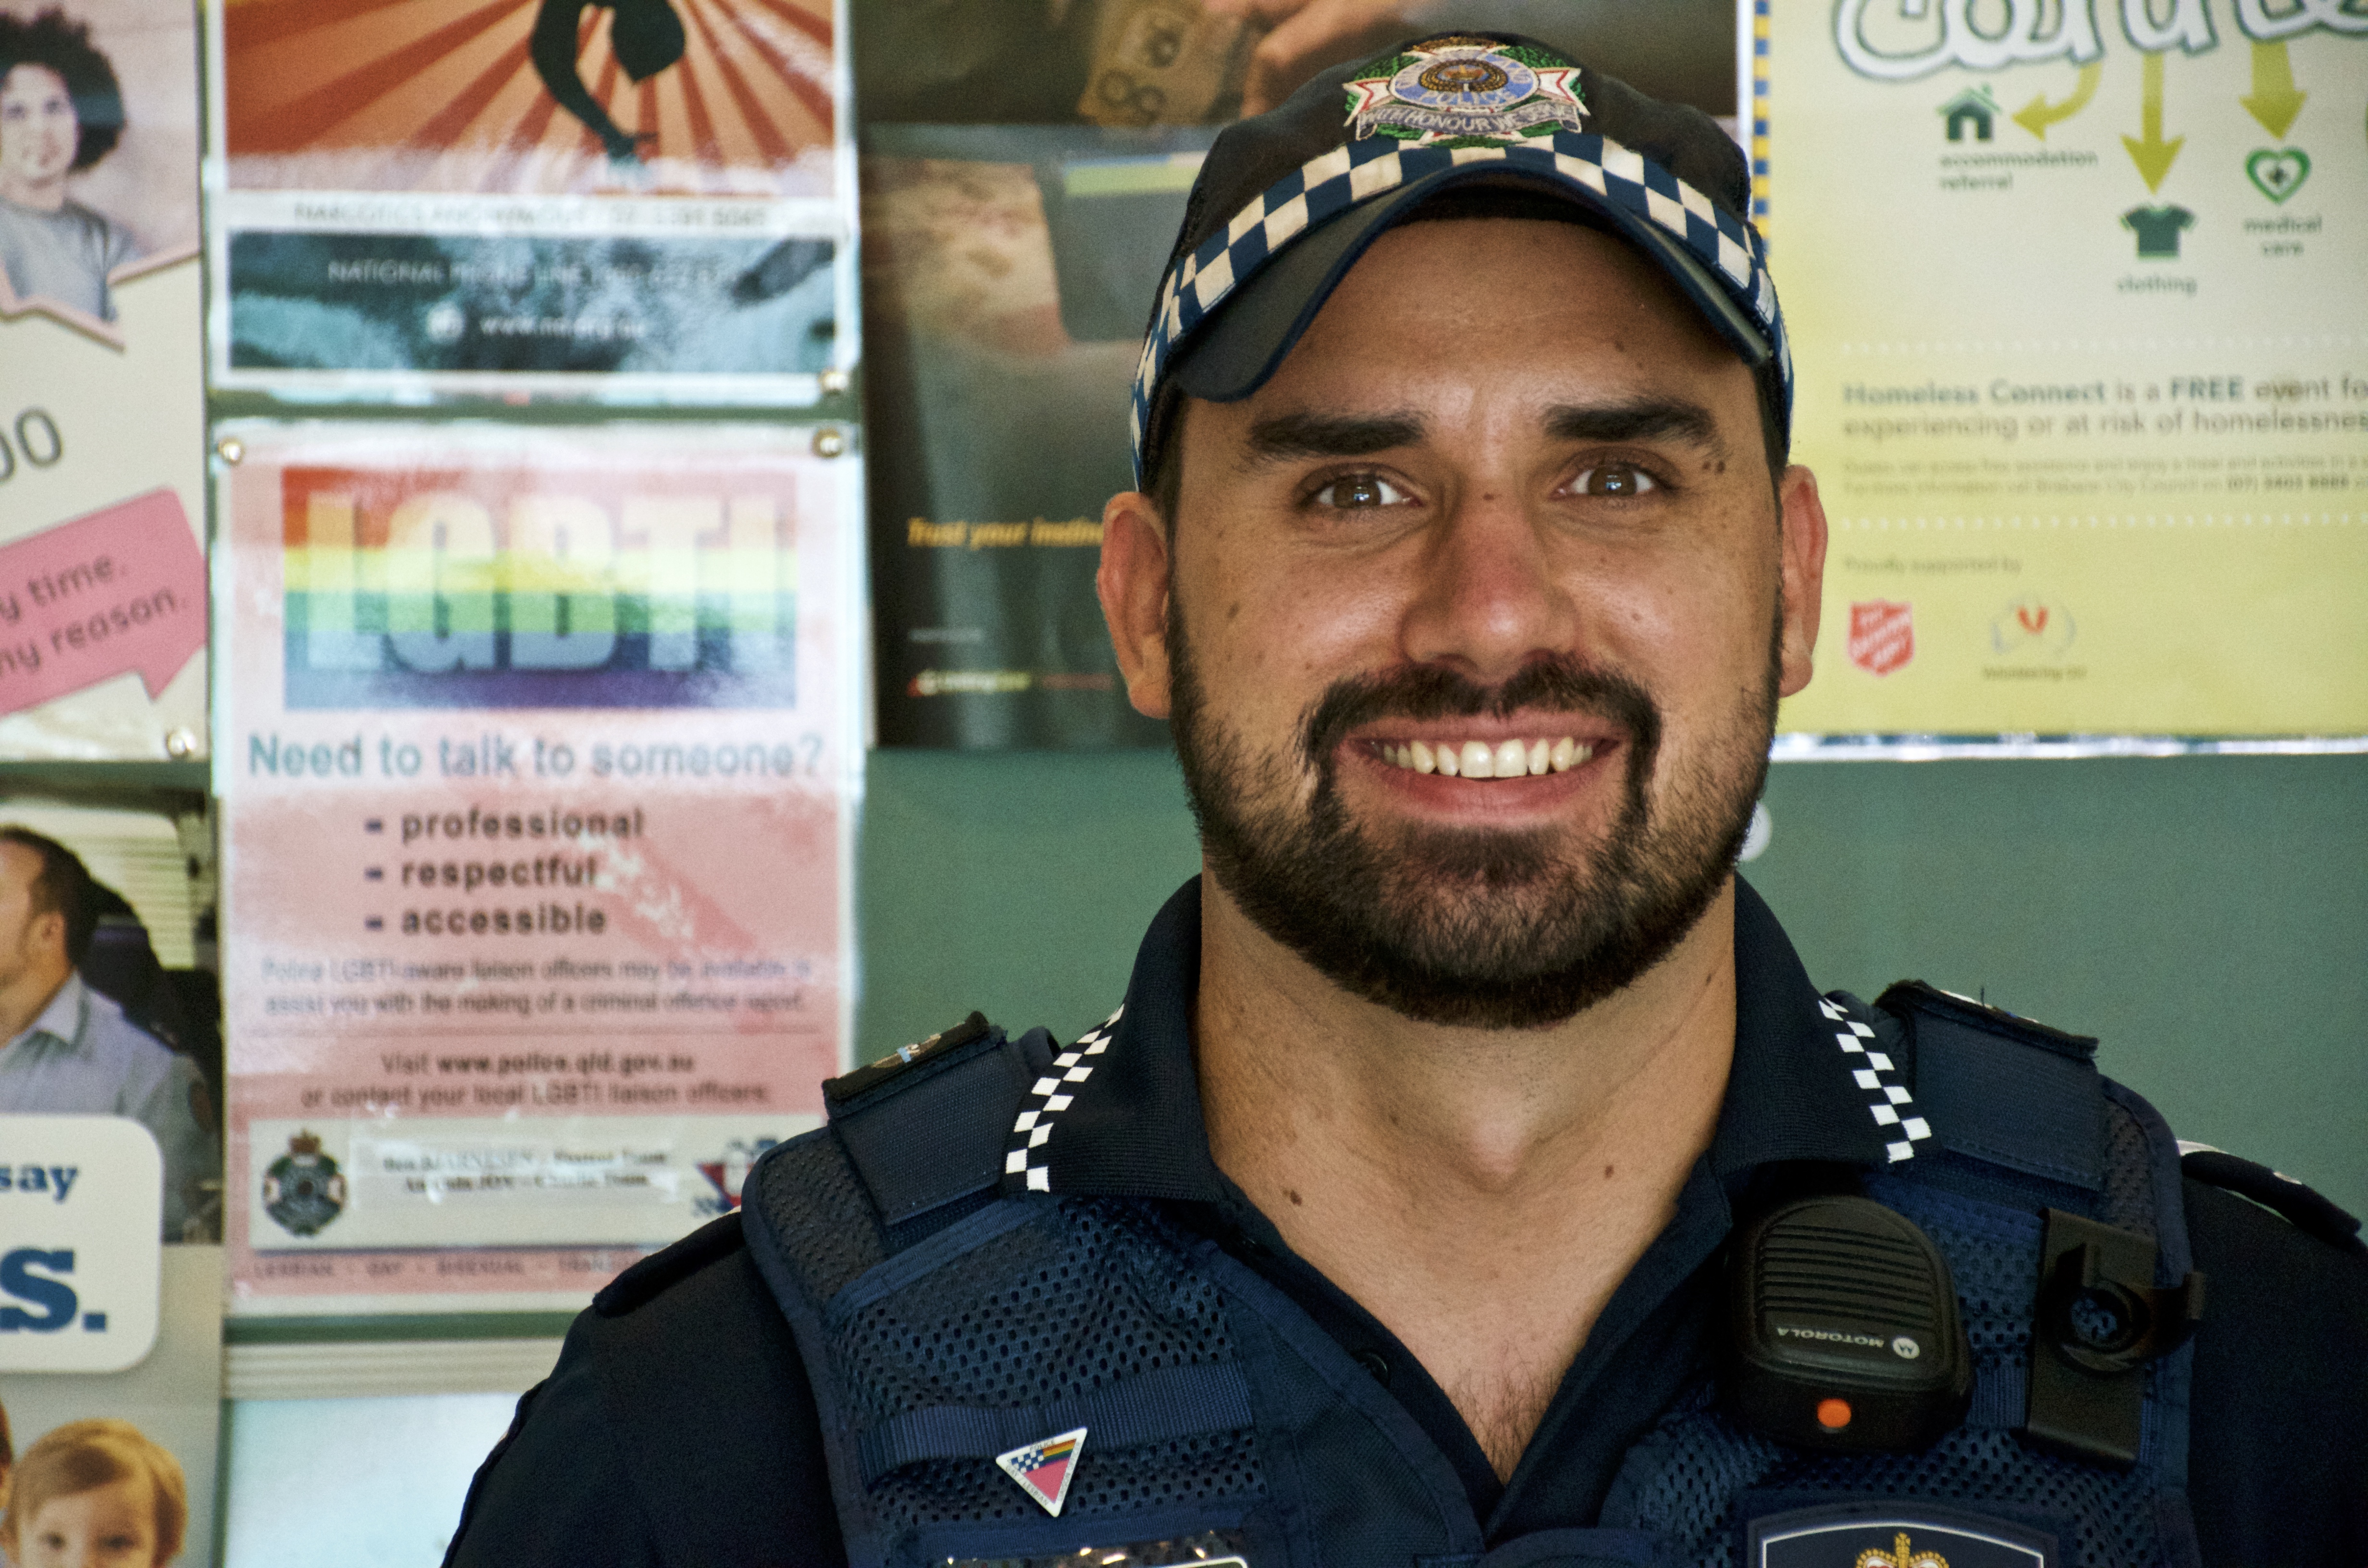 Queensland police’s LGBTI Liaison Program goes from strength to strength